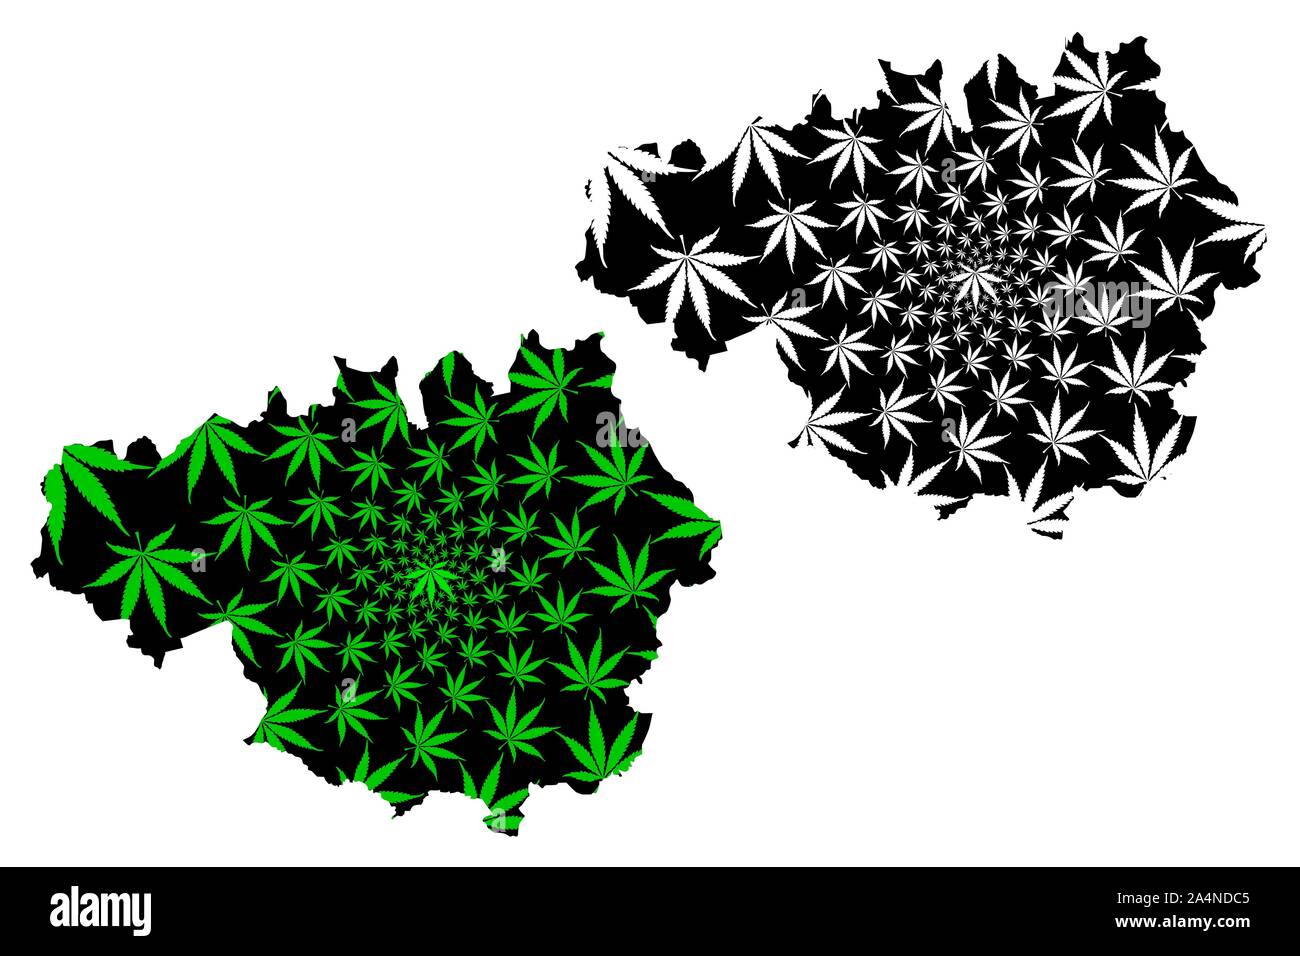 Greater Manchester (United Kingdom, England, Metropolitan county) map is designed cannabis leaf green and black, Greater Manchester map made of mariju Stock Vector